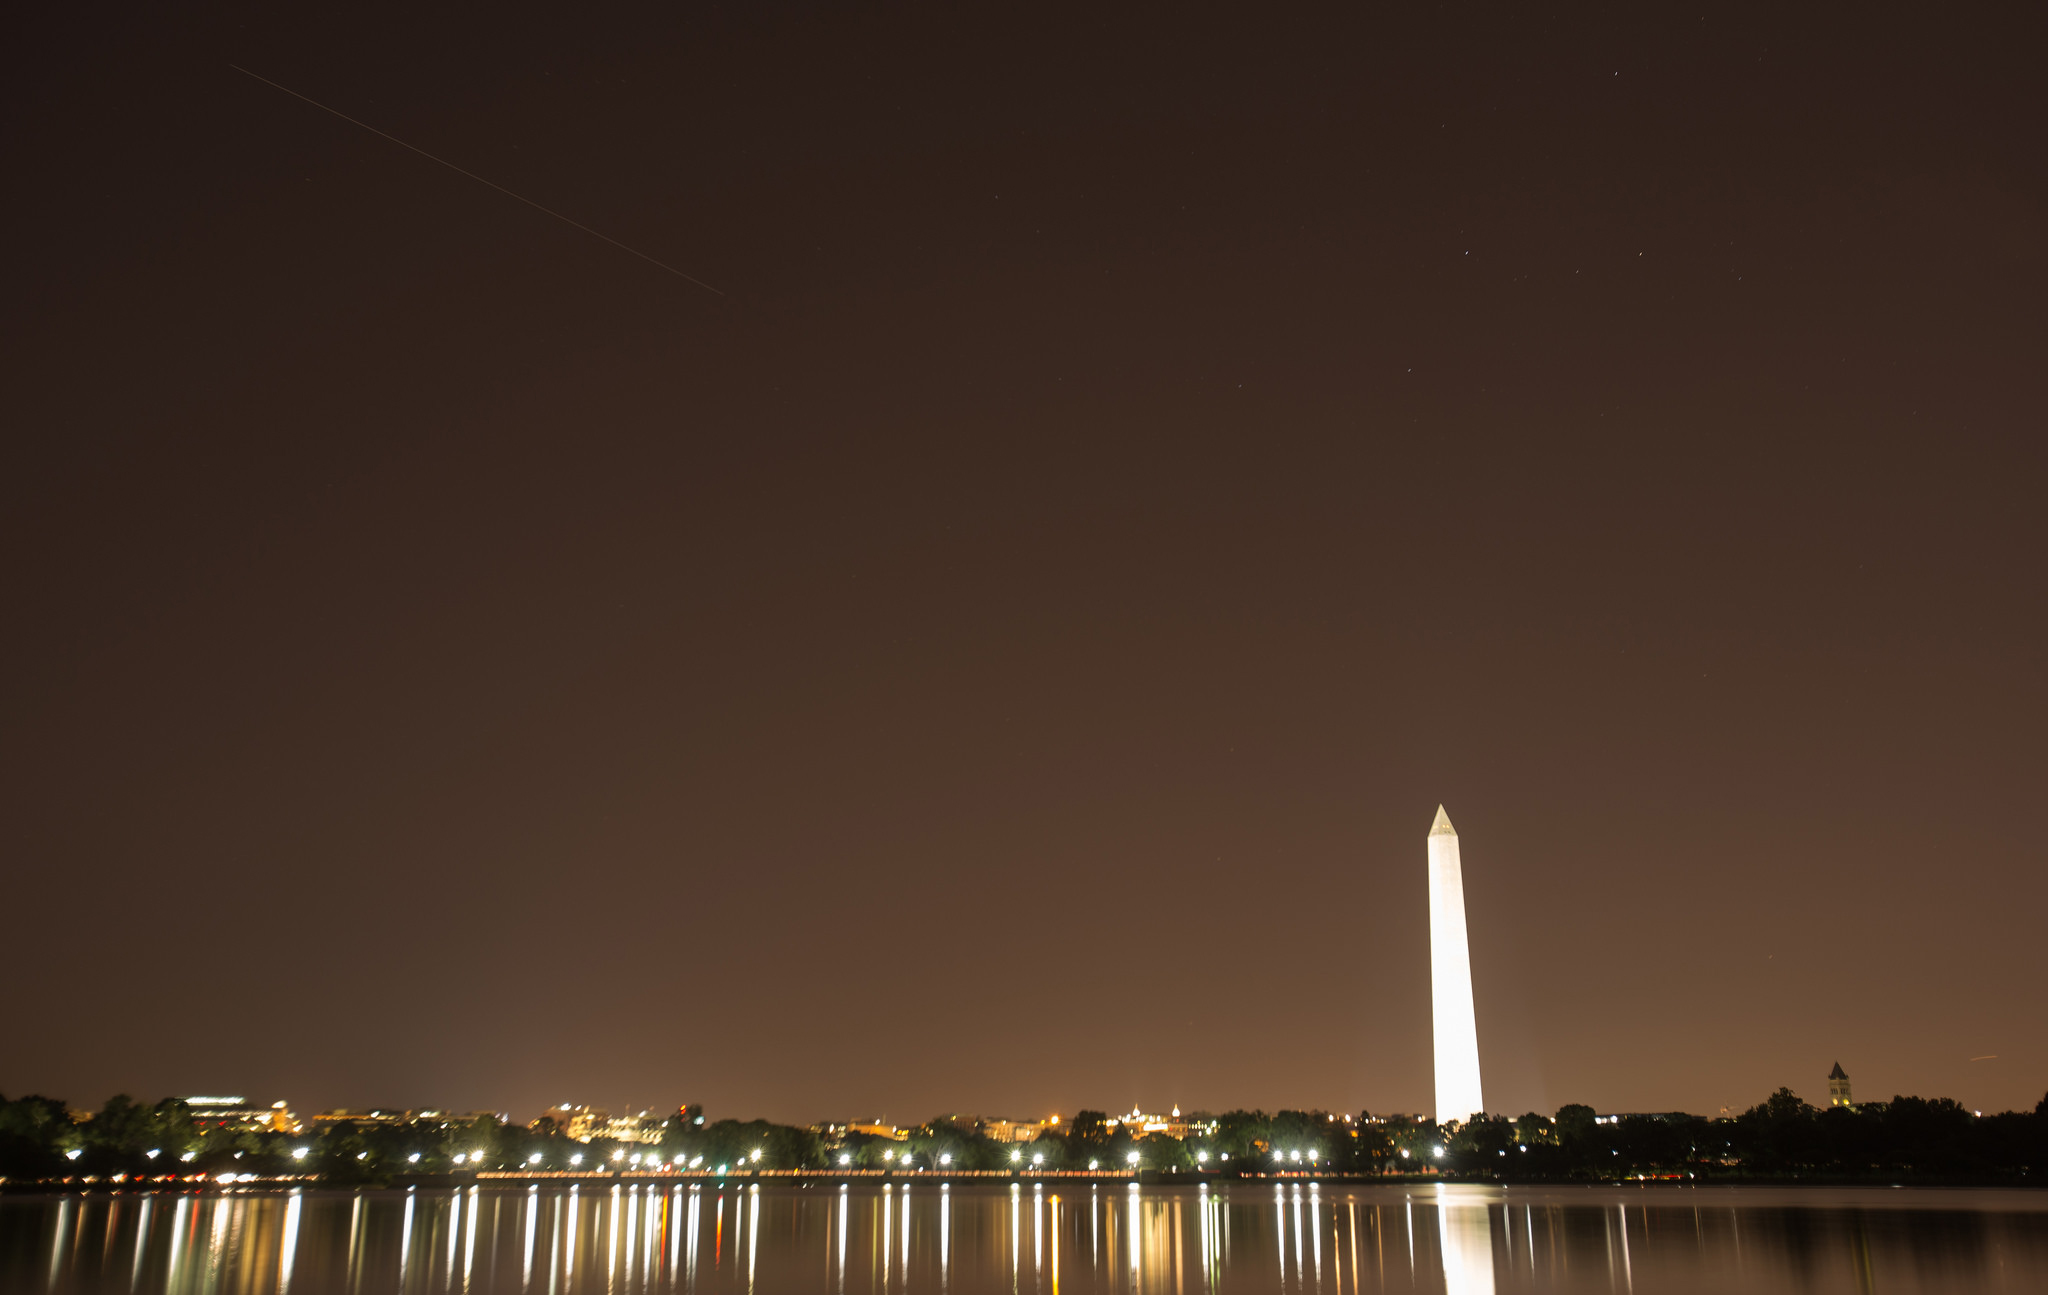 The International Space Station is seen in this thirty second exposure as it flies over Washington, DC on Aug. 1, 2015.